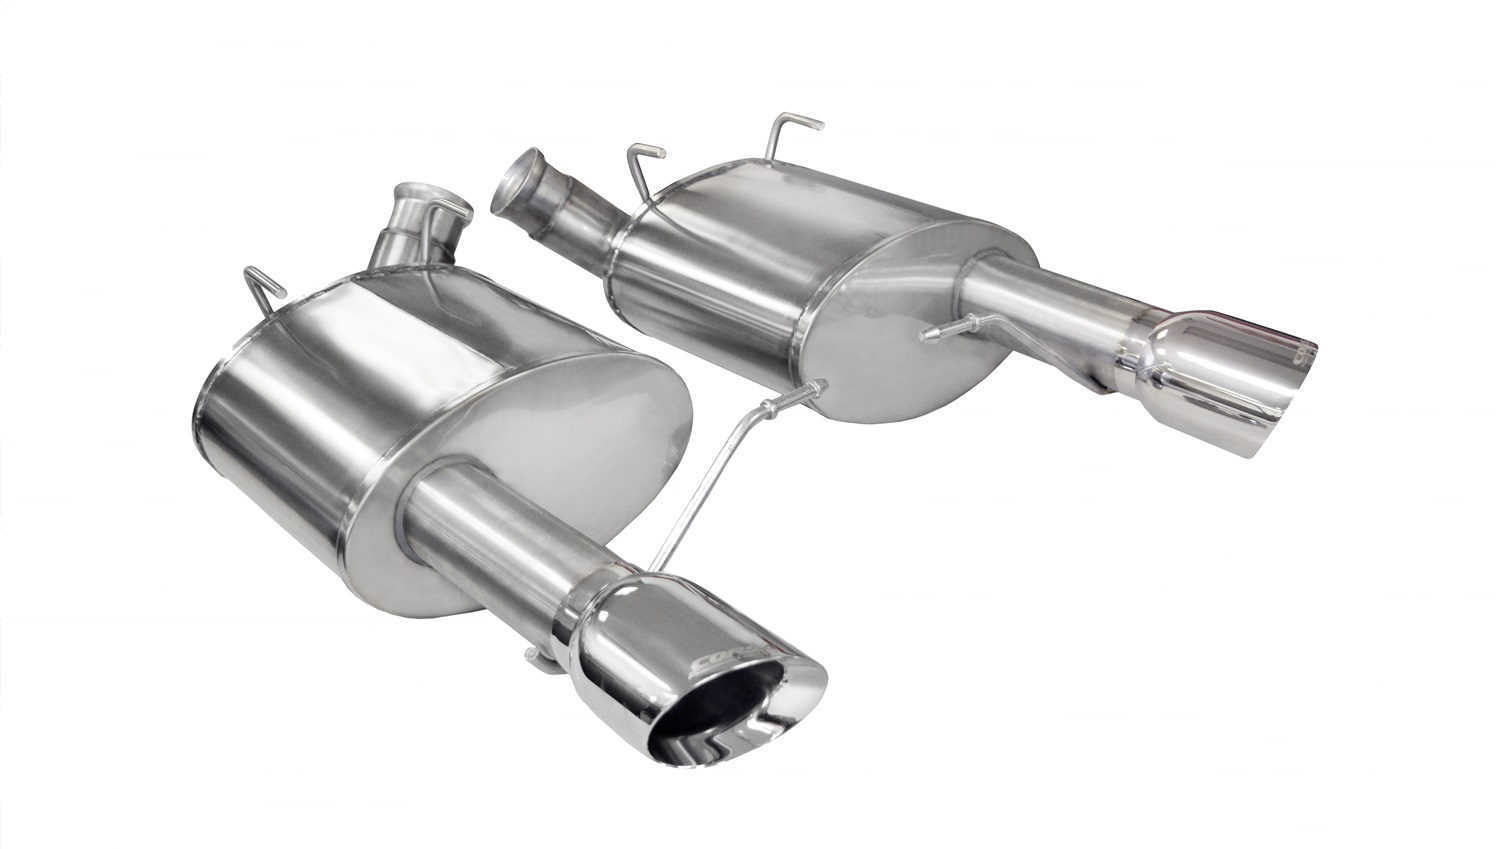 Corsa Performance Corsa Performance 14317 Xtreme Axle-Back Exhaust System Fits 11-14 Mustang